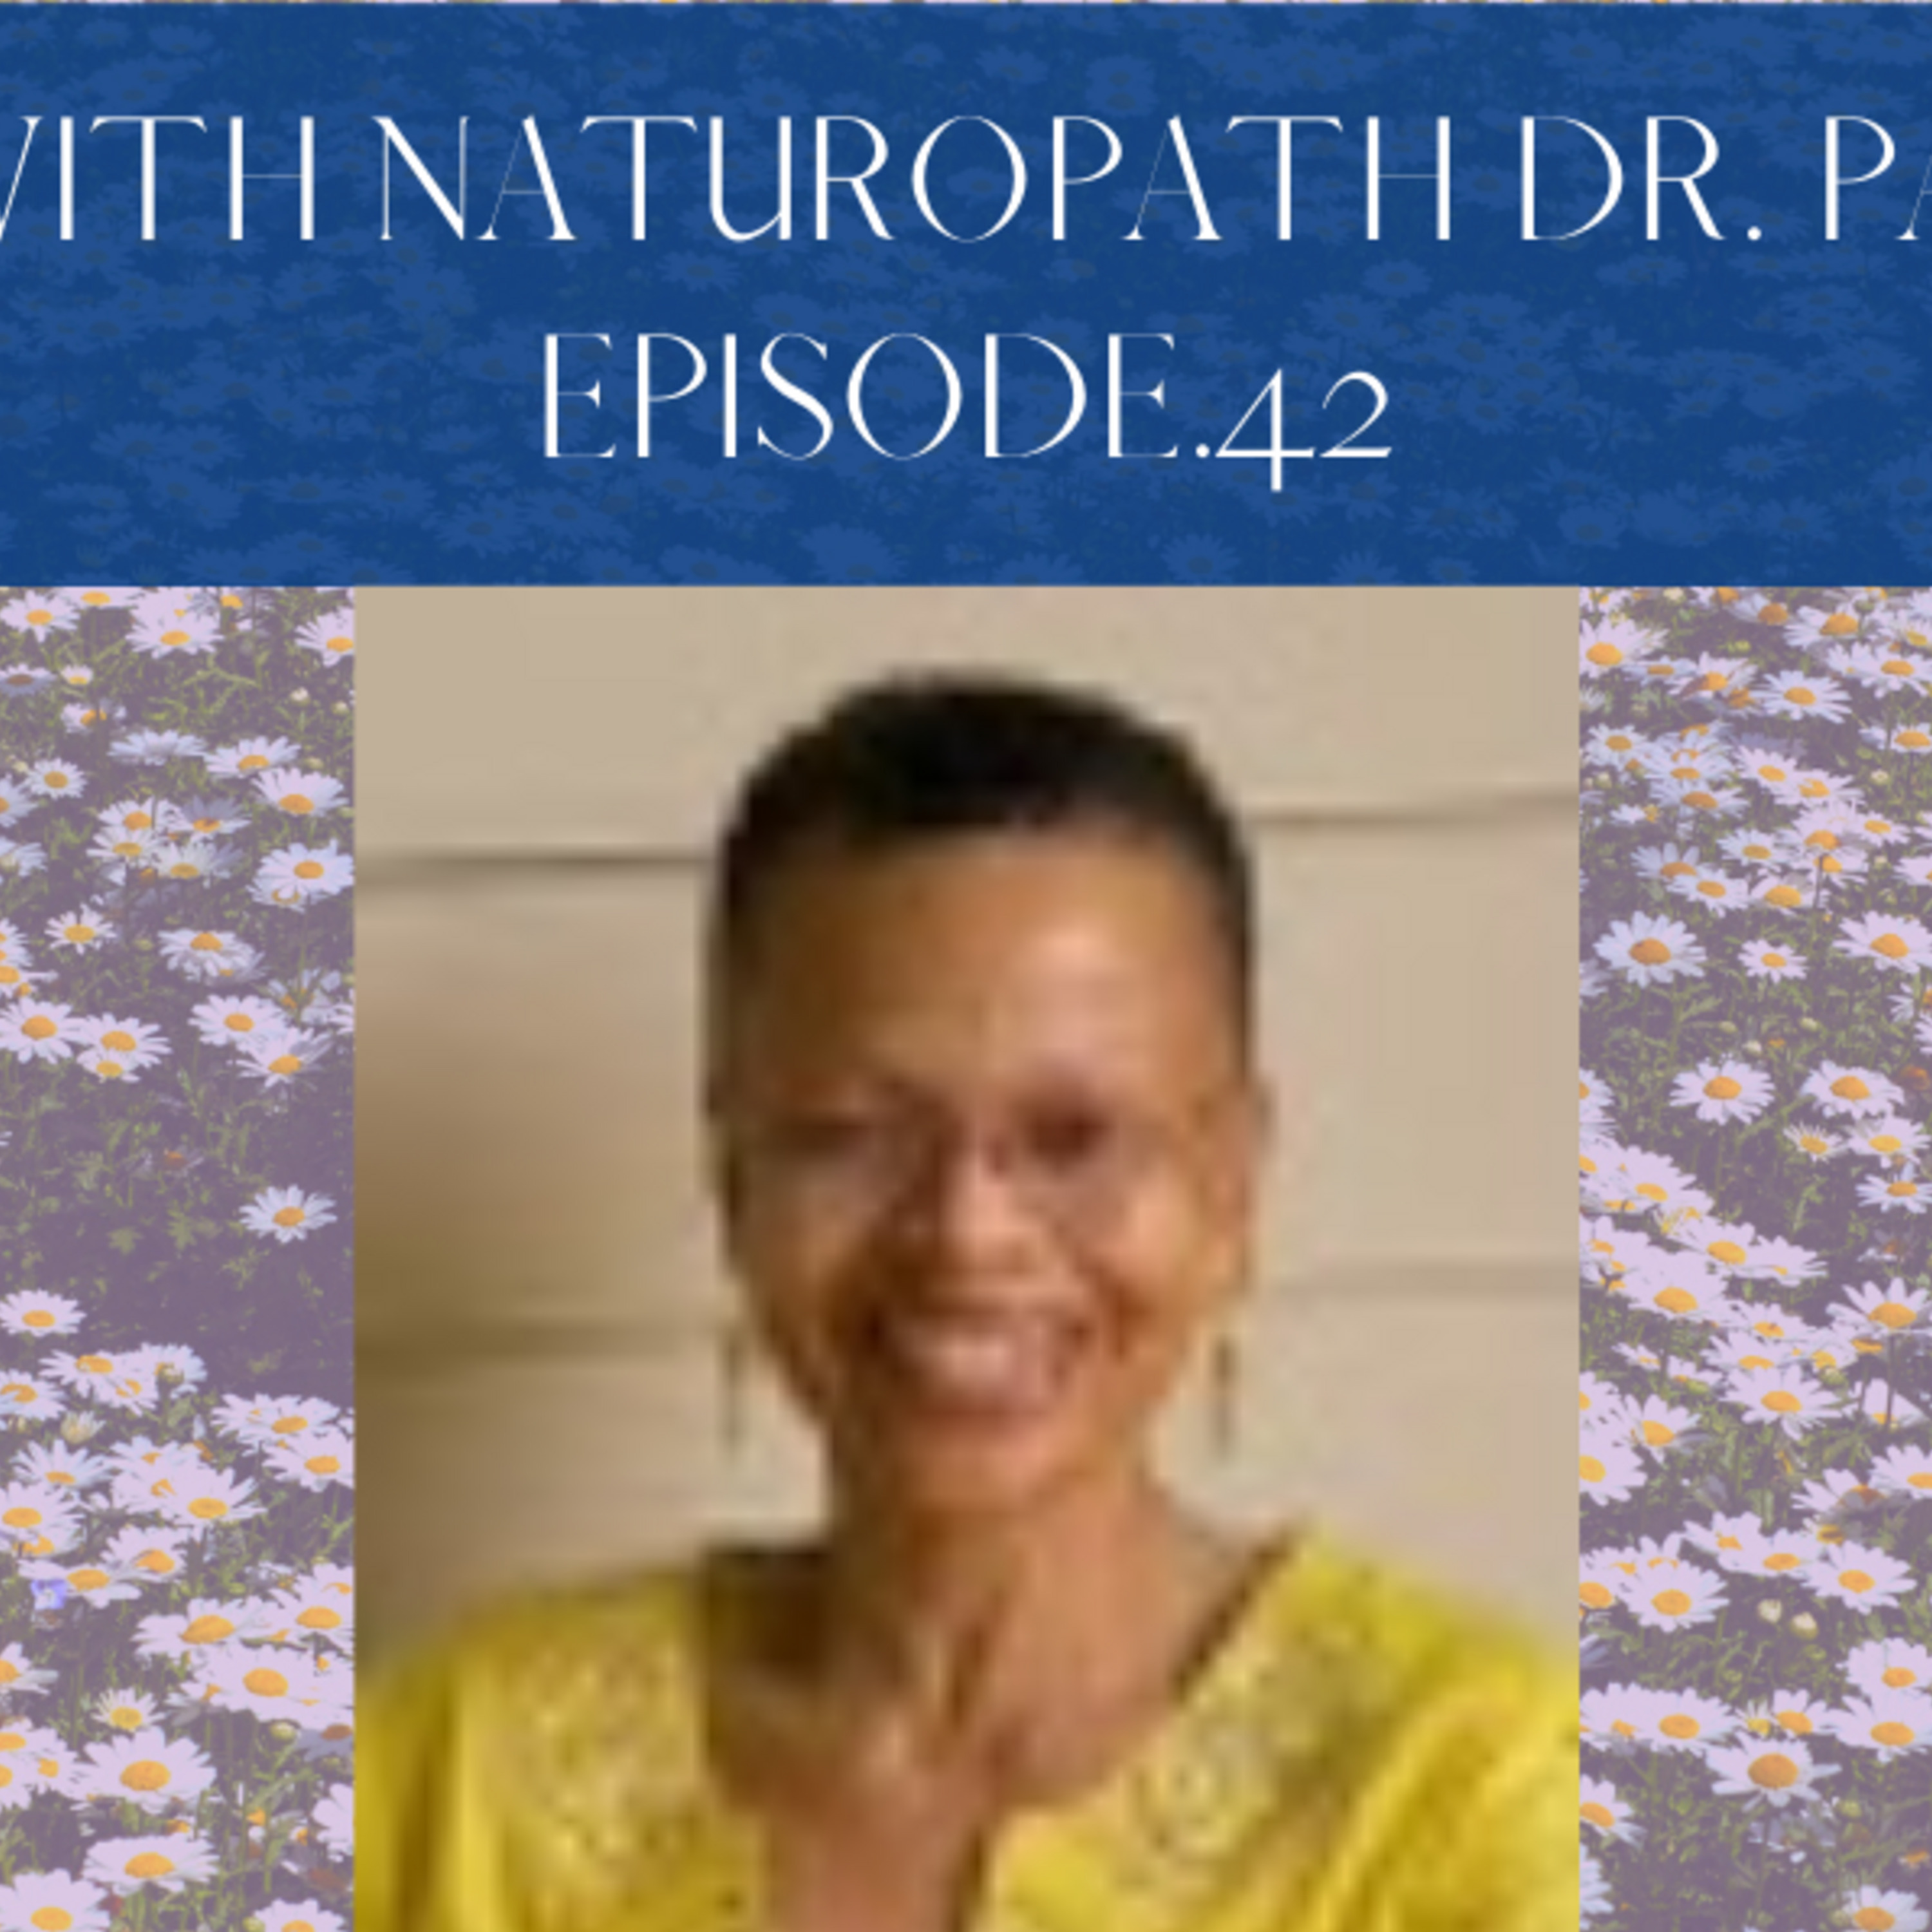 Episode 42: Interview with Naturopath Dr. Patricia Crisp